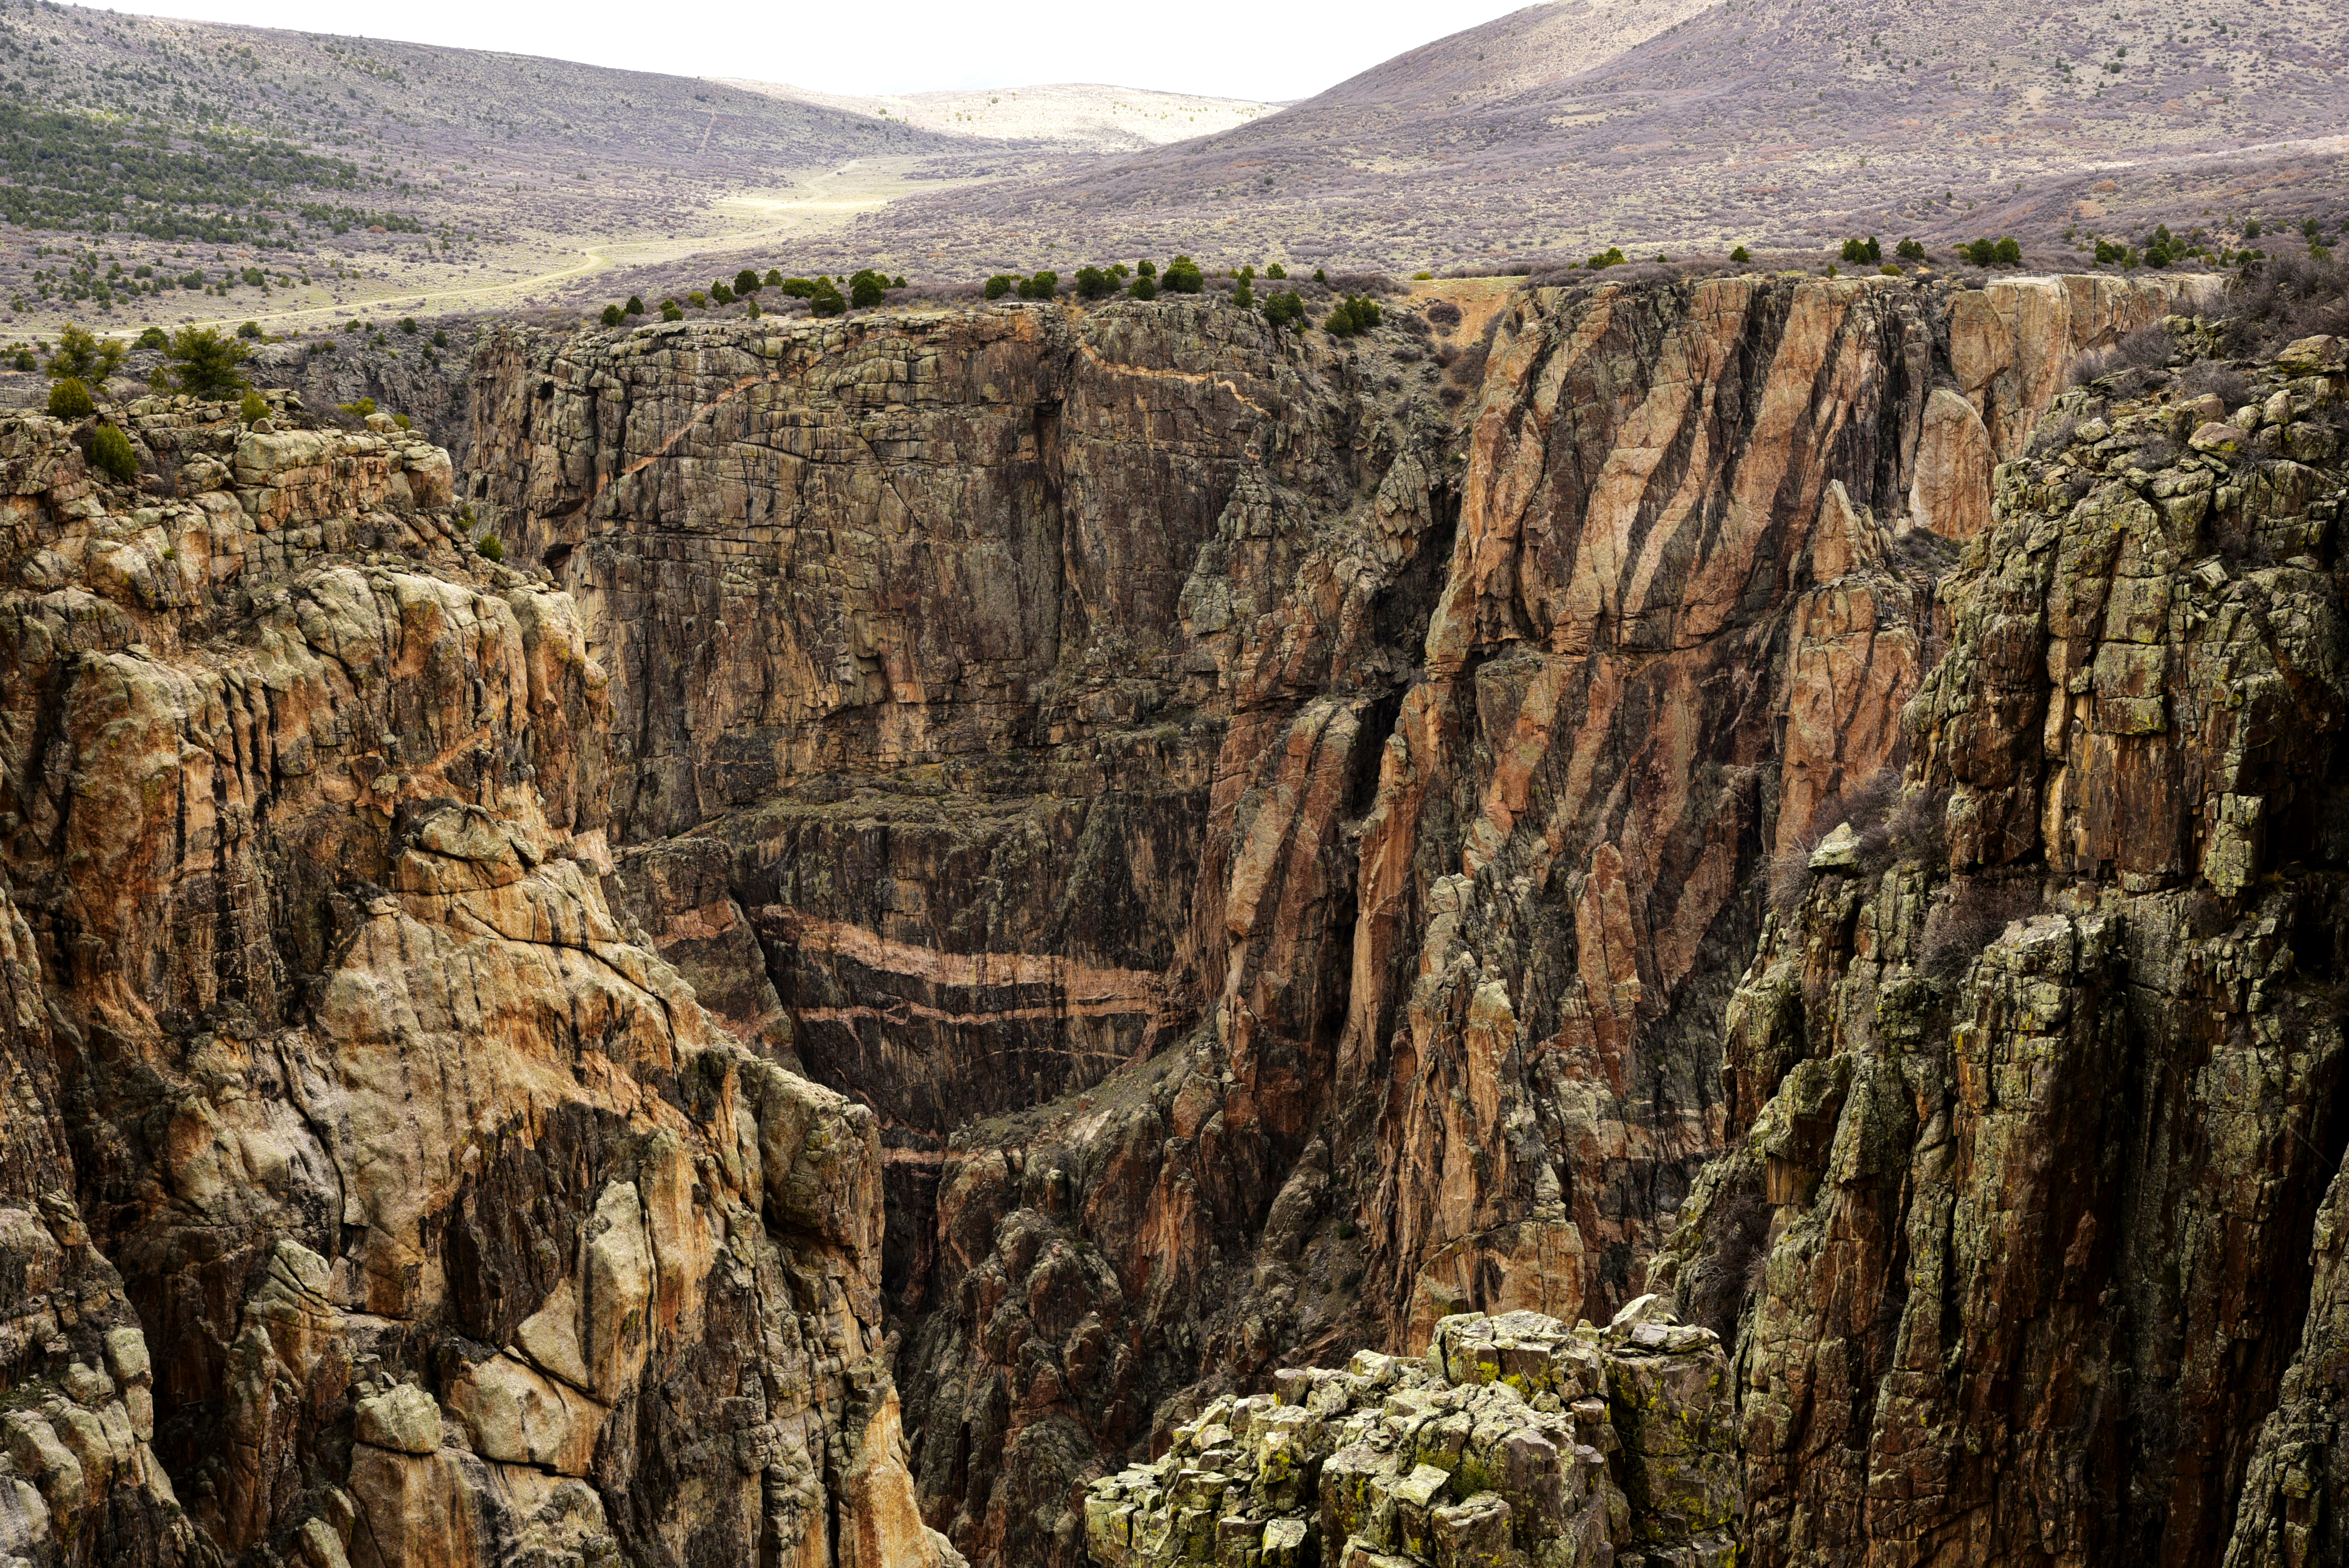 View from Cross Fissures Overlook  -  Black Canyon of the Gunnison National Park, Colorado